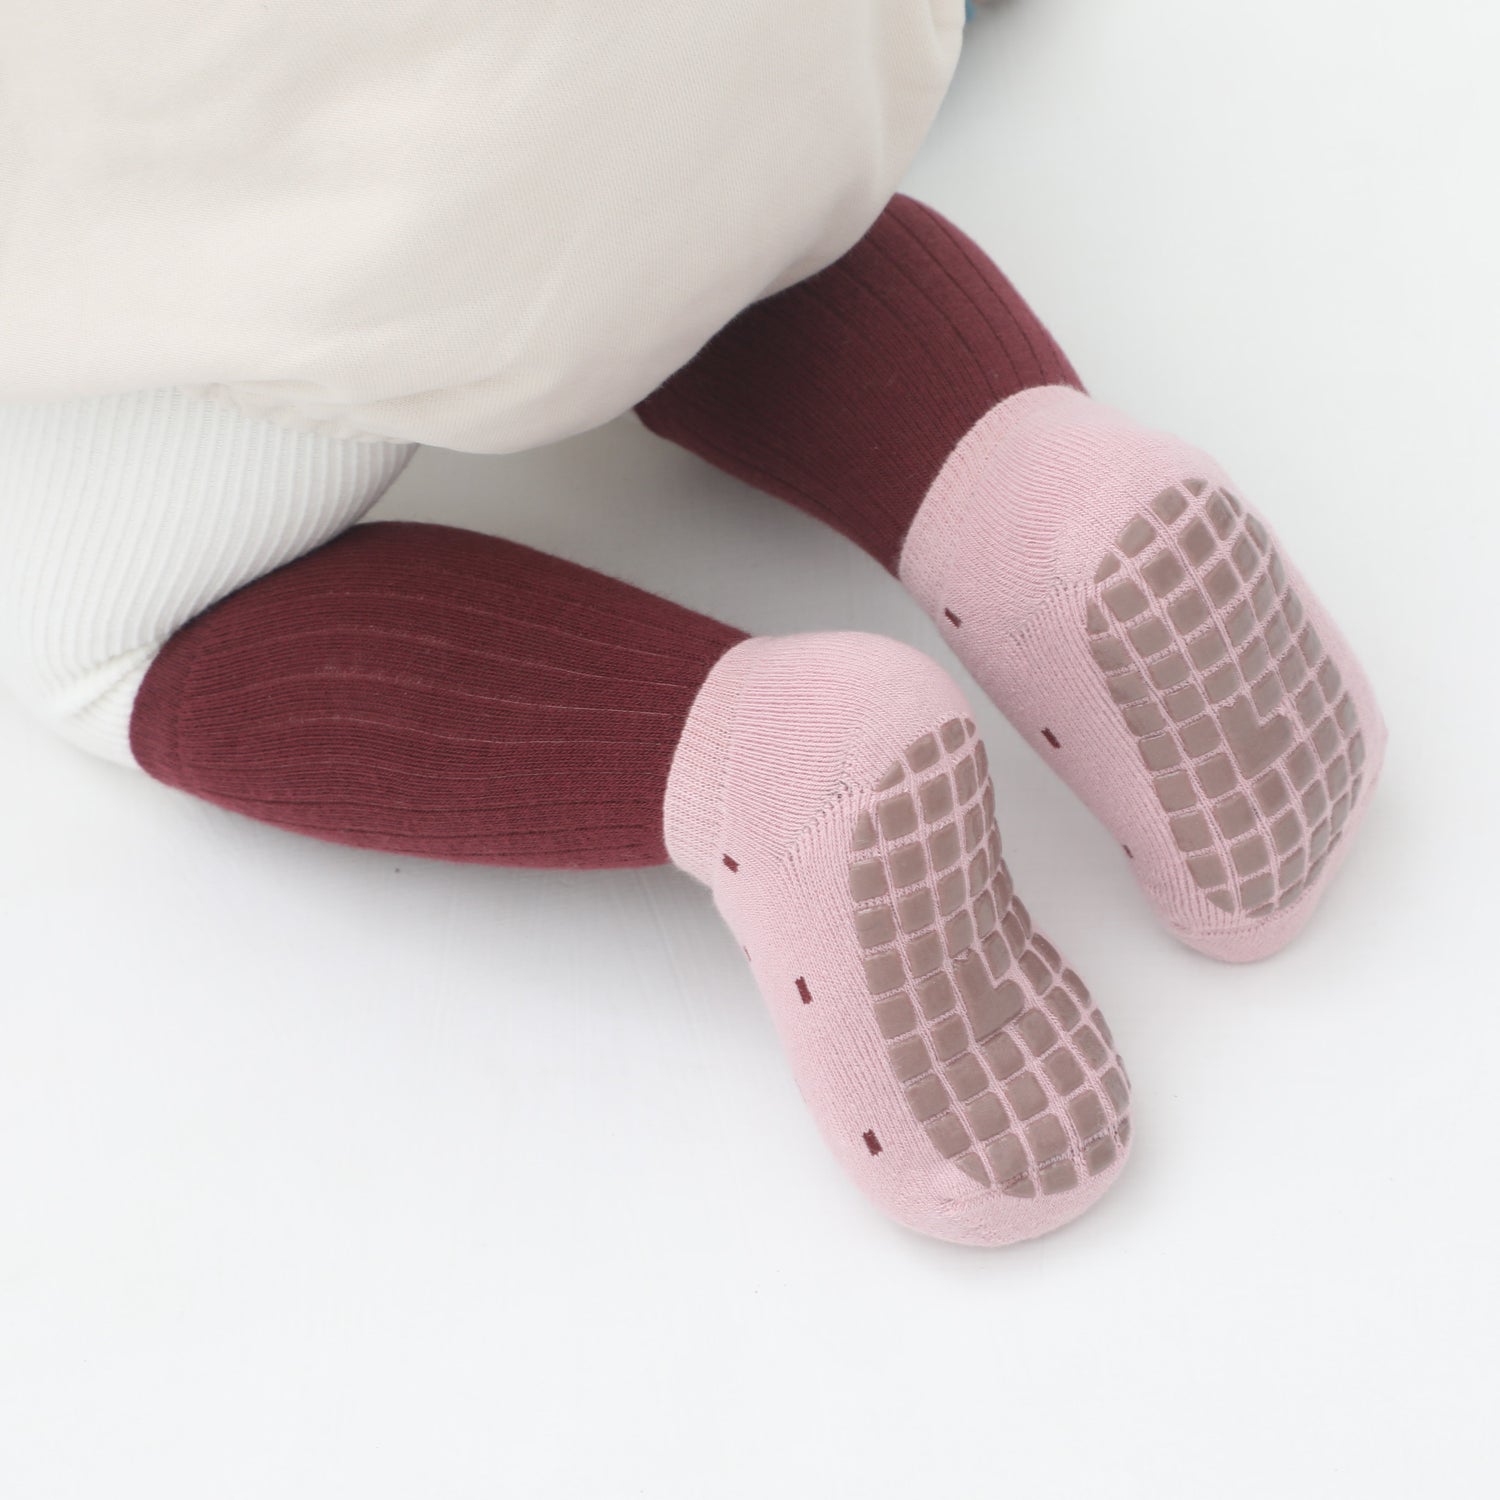 Soft and comfortable non-skid infant socks for all seasons